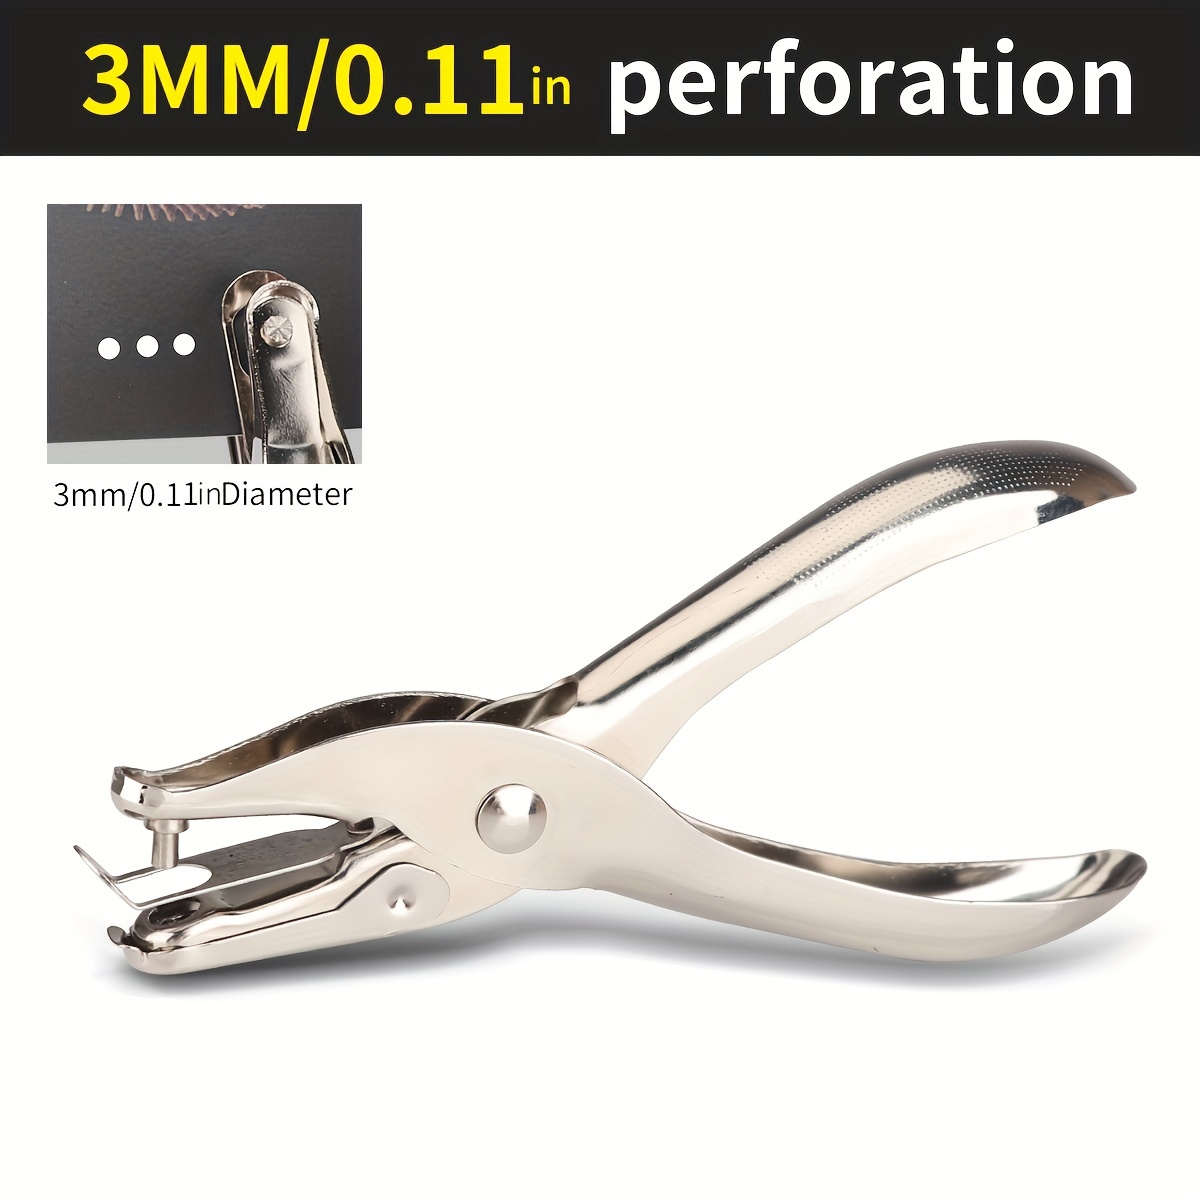 Single Hole Punch Single Hole Pliers, Small Hole Paper Punchers